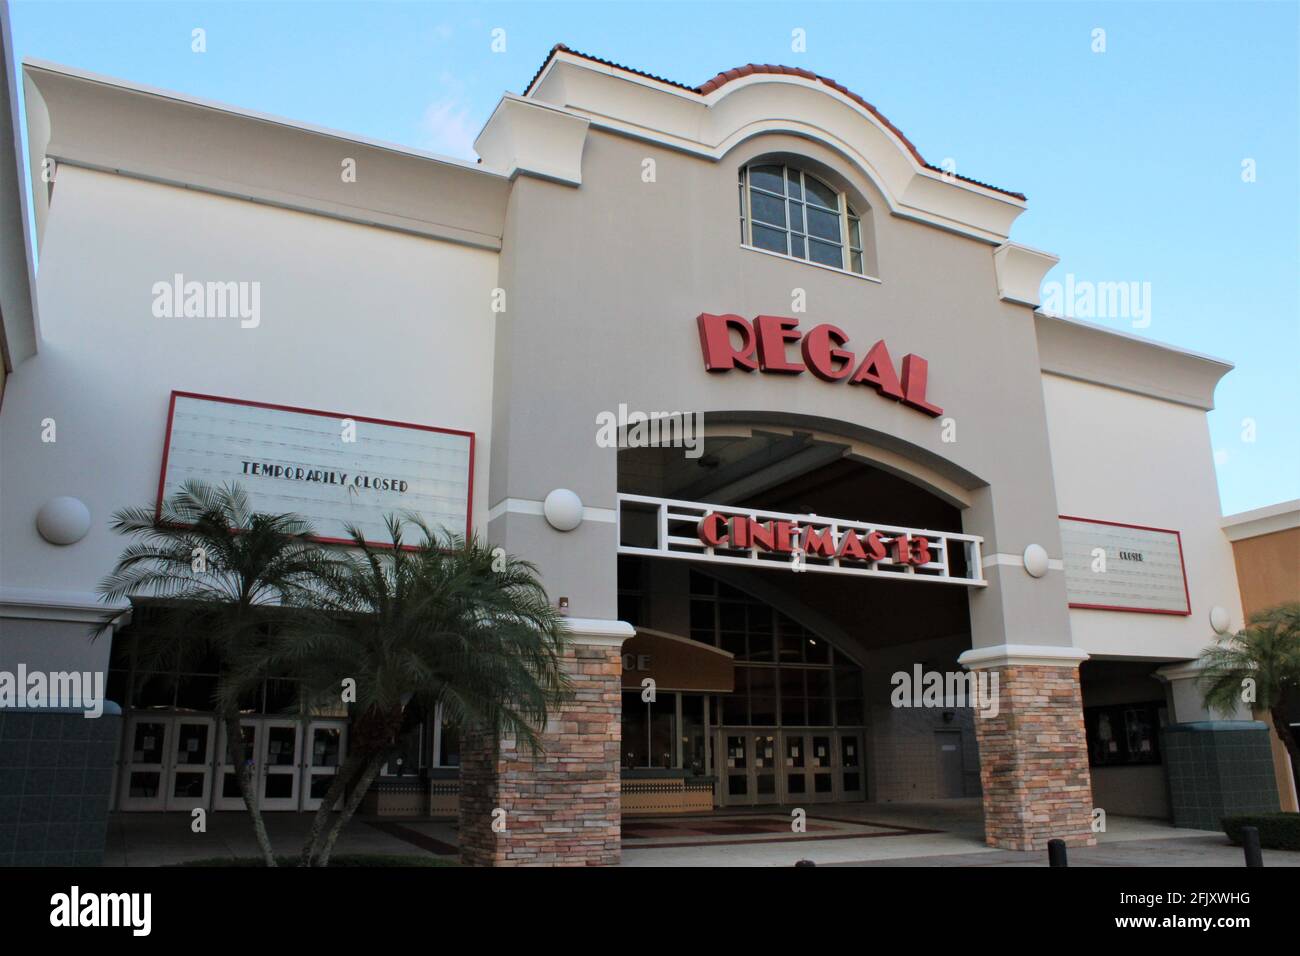 The Regal Cinemas in south Florida.  Temporarily closed due to covid-19 virus. Regal offers the best cinematic experience in digital 2D, 3D, IMAX. Stock Photo